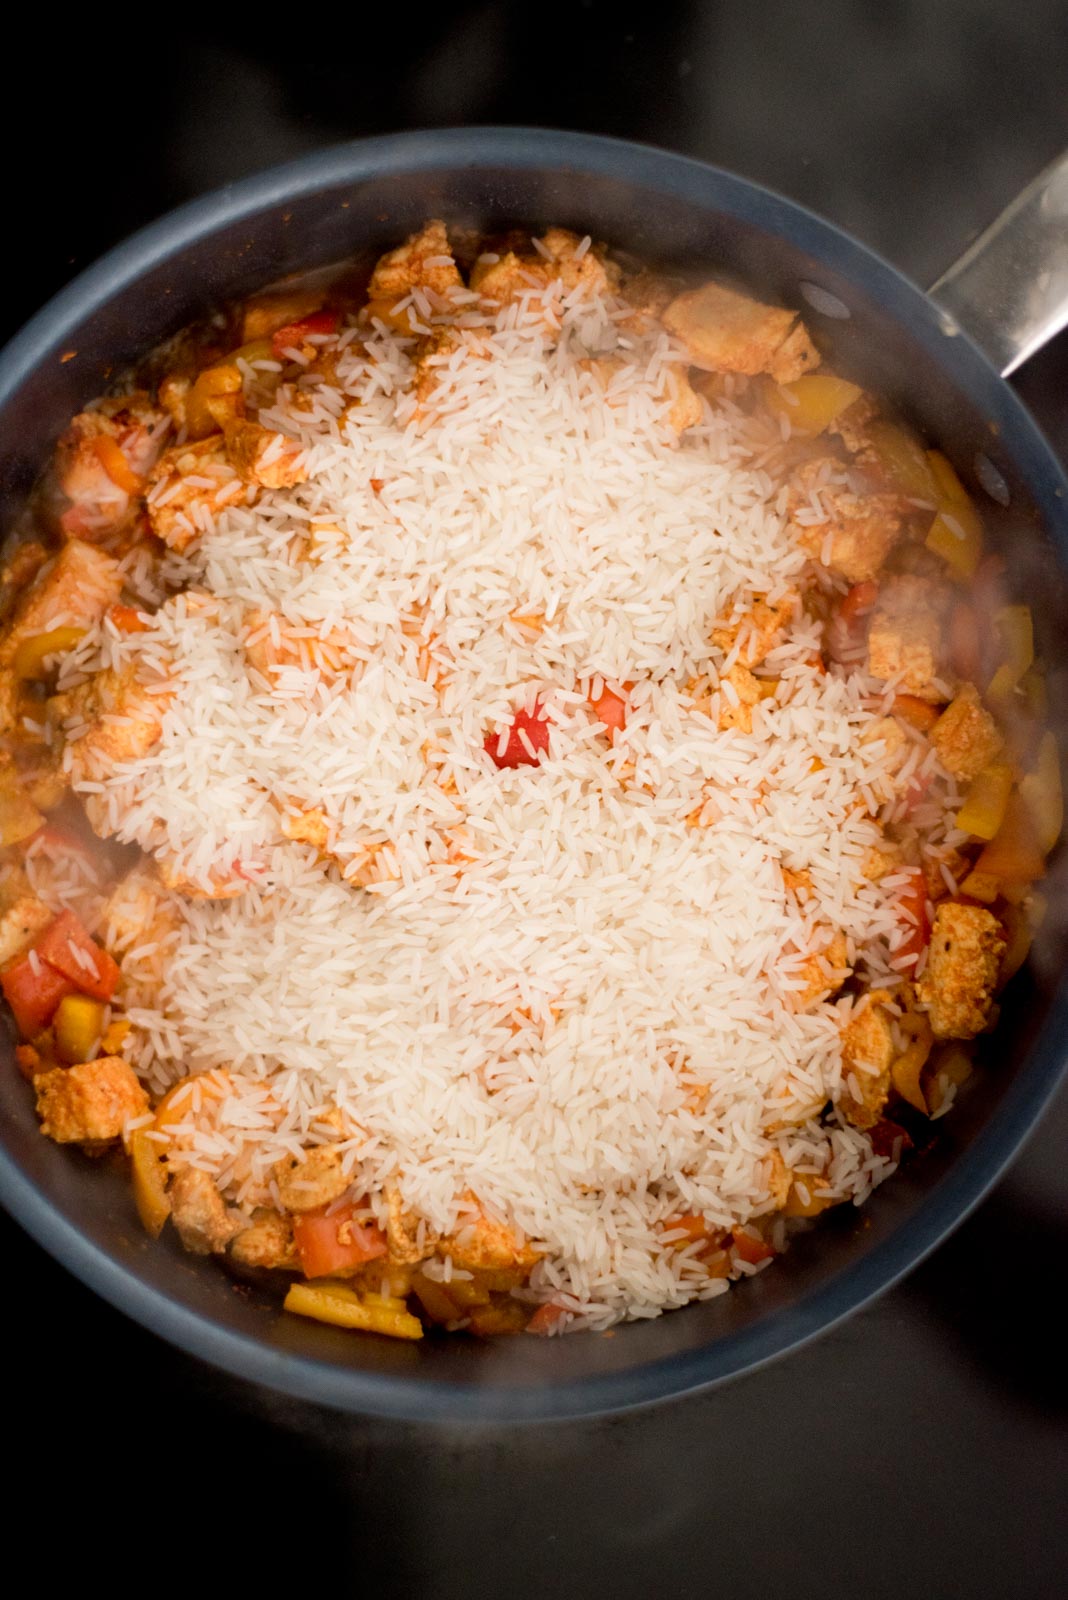 rice added to the skillet on the stove with the cooked chicken and bell peppers